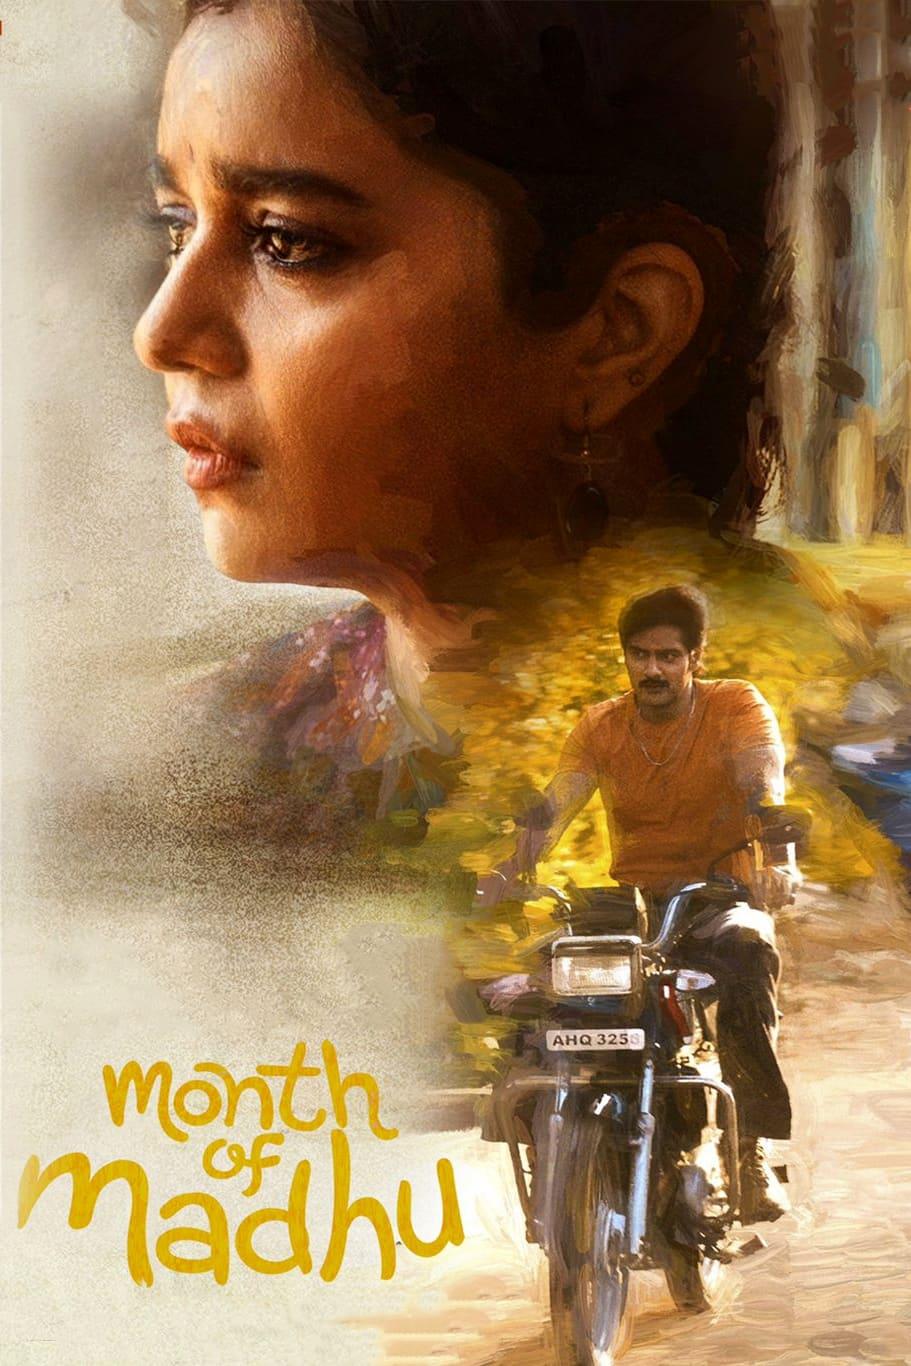 Month of Madhu poster